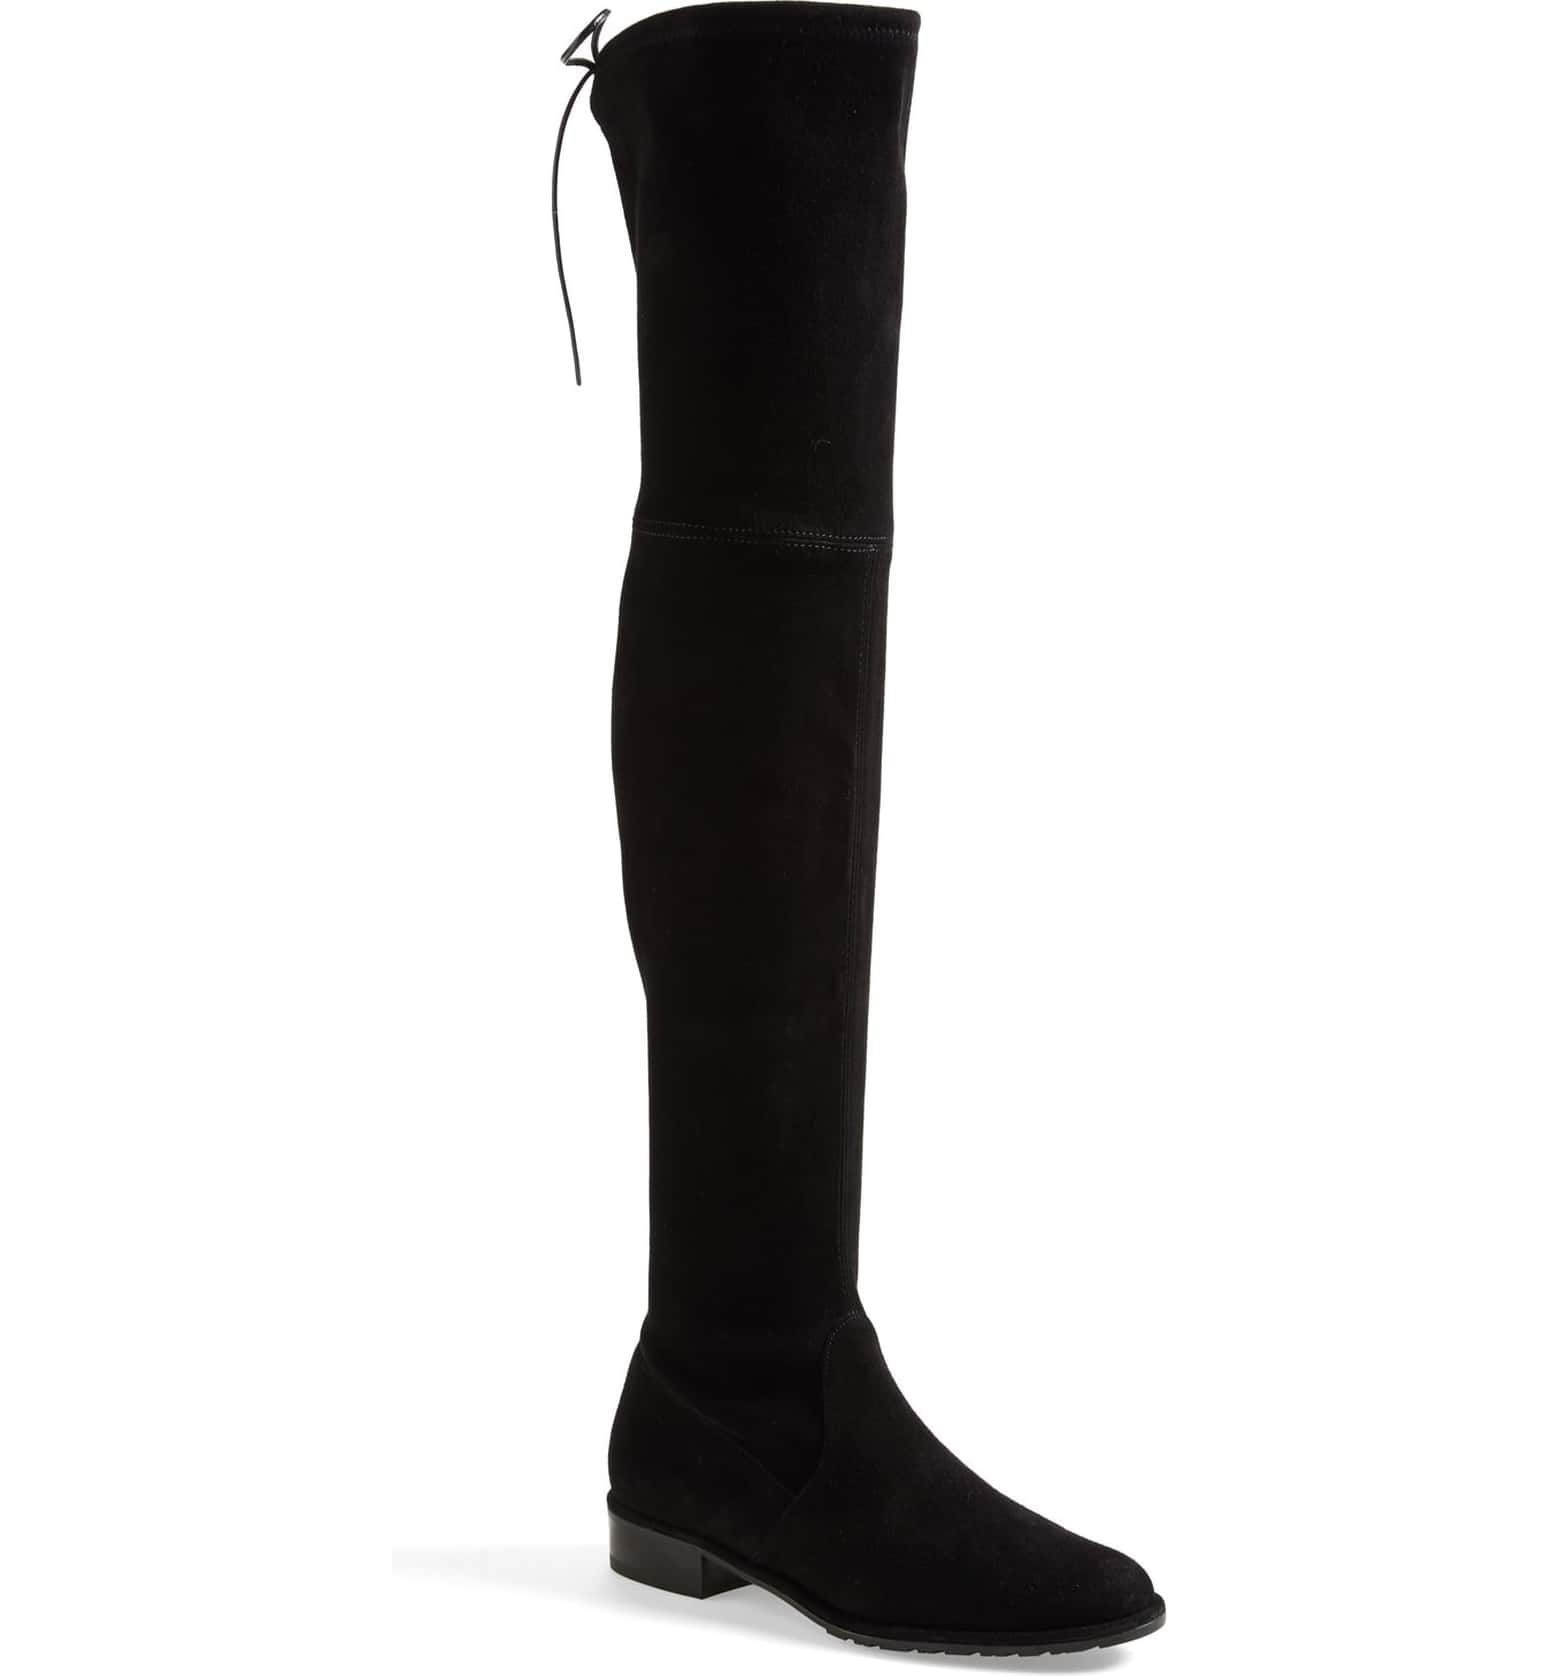 Lowland Over the Knee Boot in Black Suede